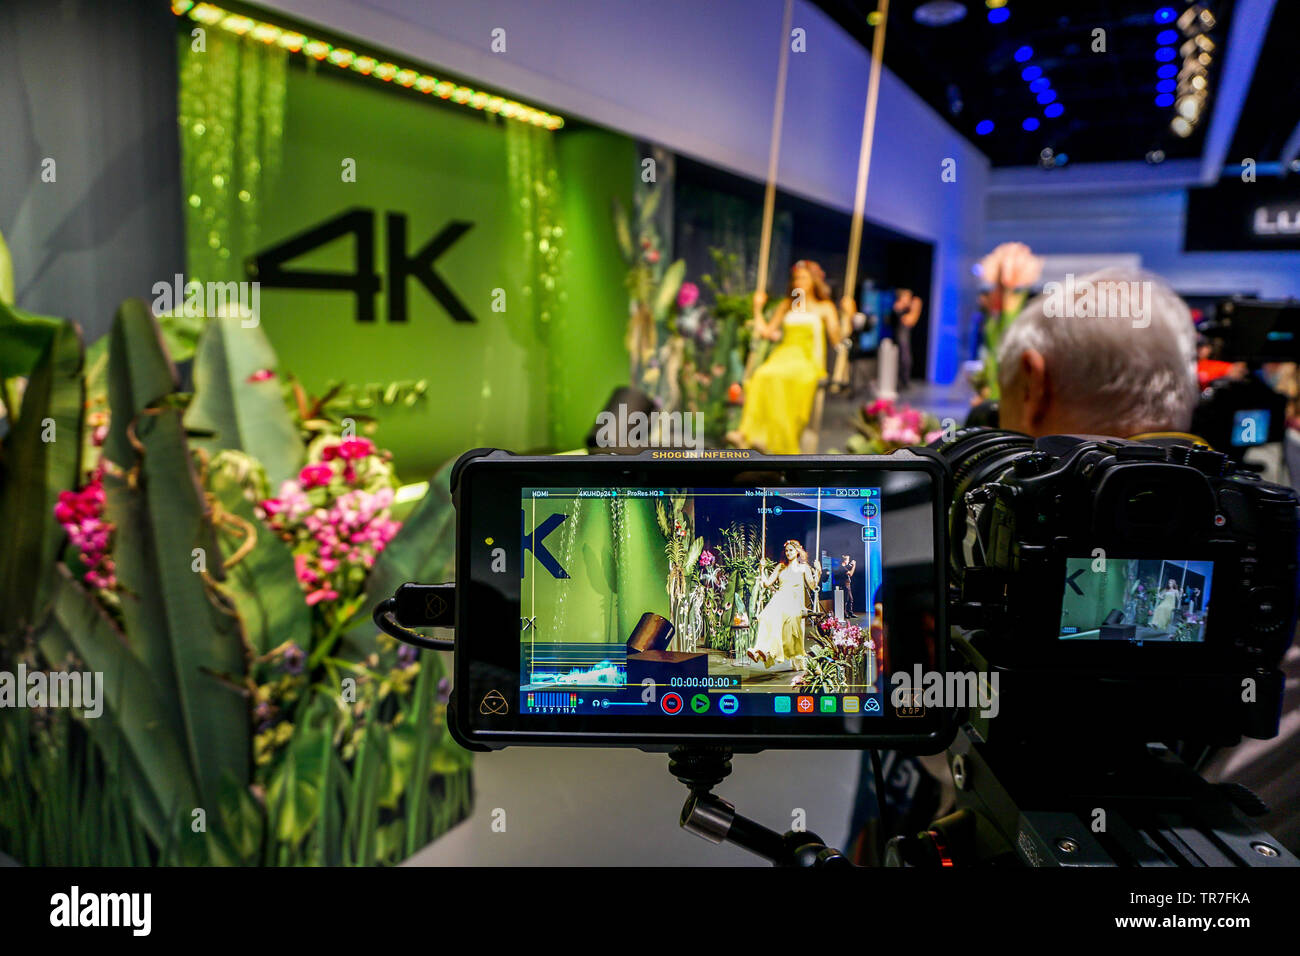 COLOGNE, GERMANY - SEPTEMBER 21, 2016: Photokina Exhibition interior. The Photokina is the world's largest trade fair for the photographic and imaging Stock Photo